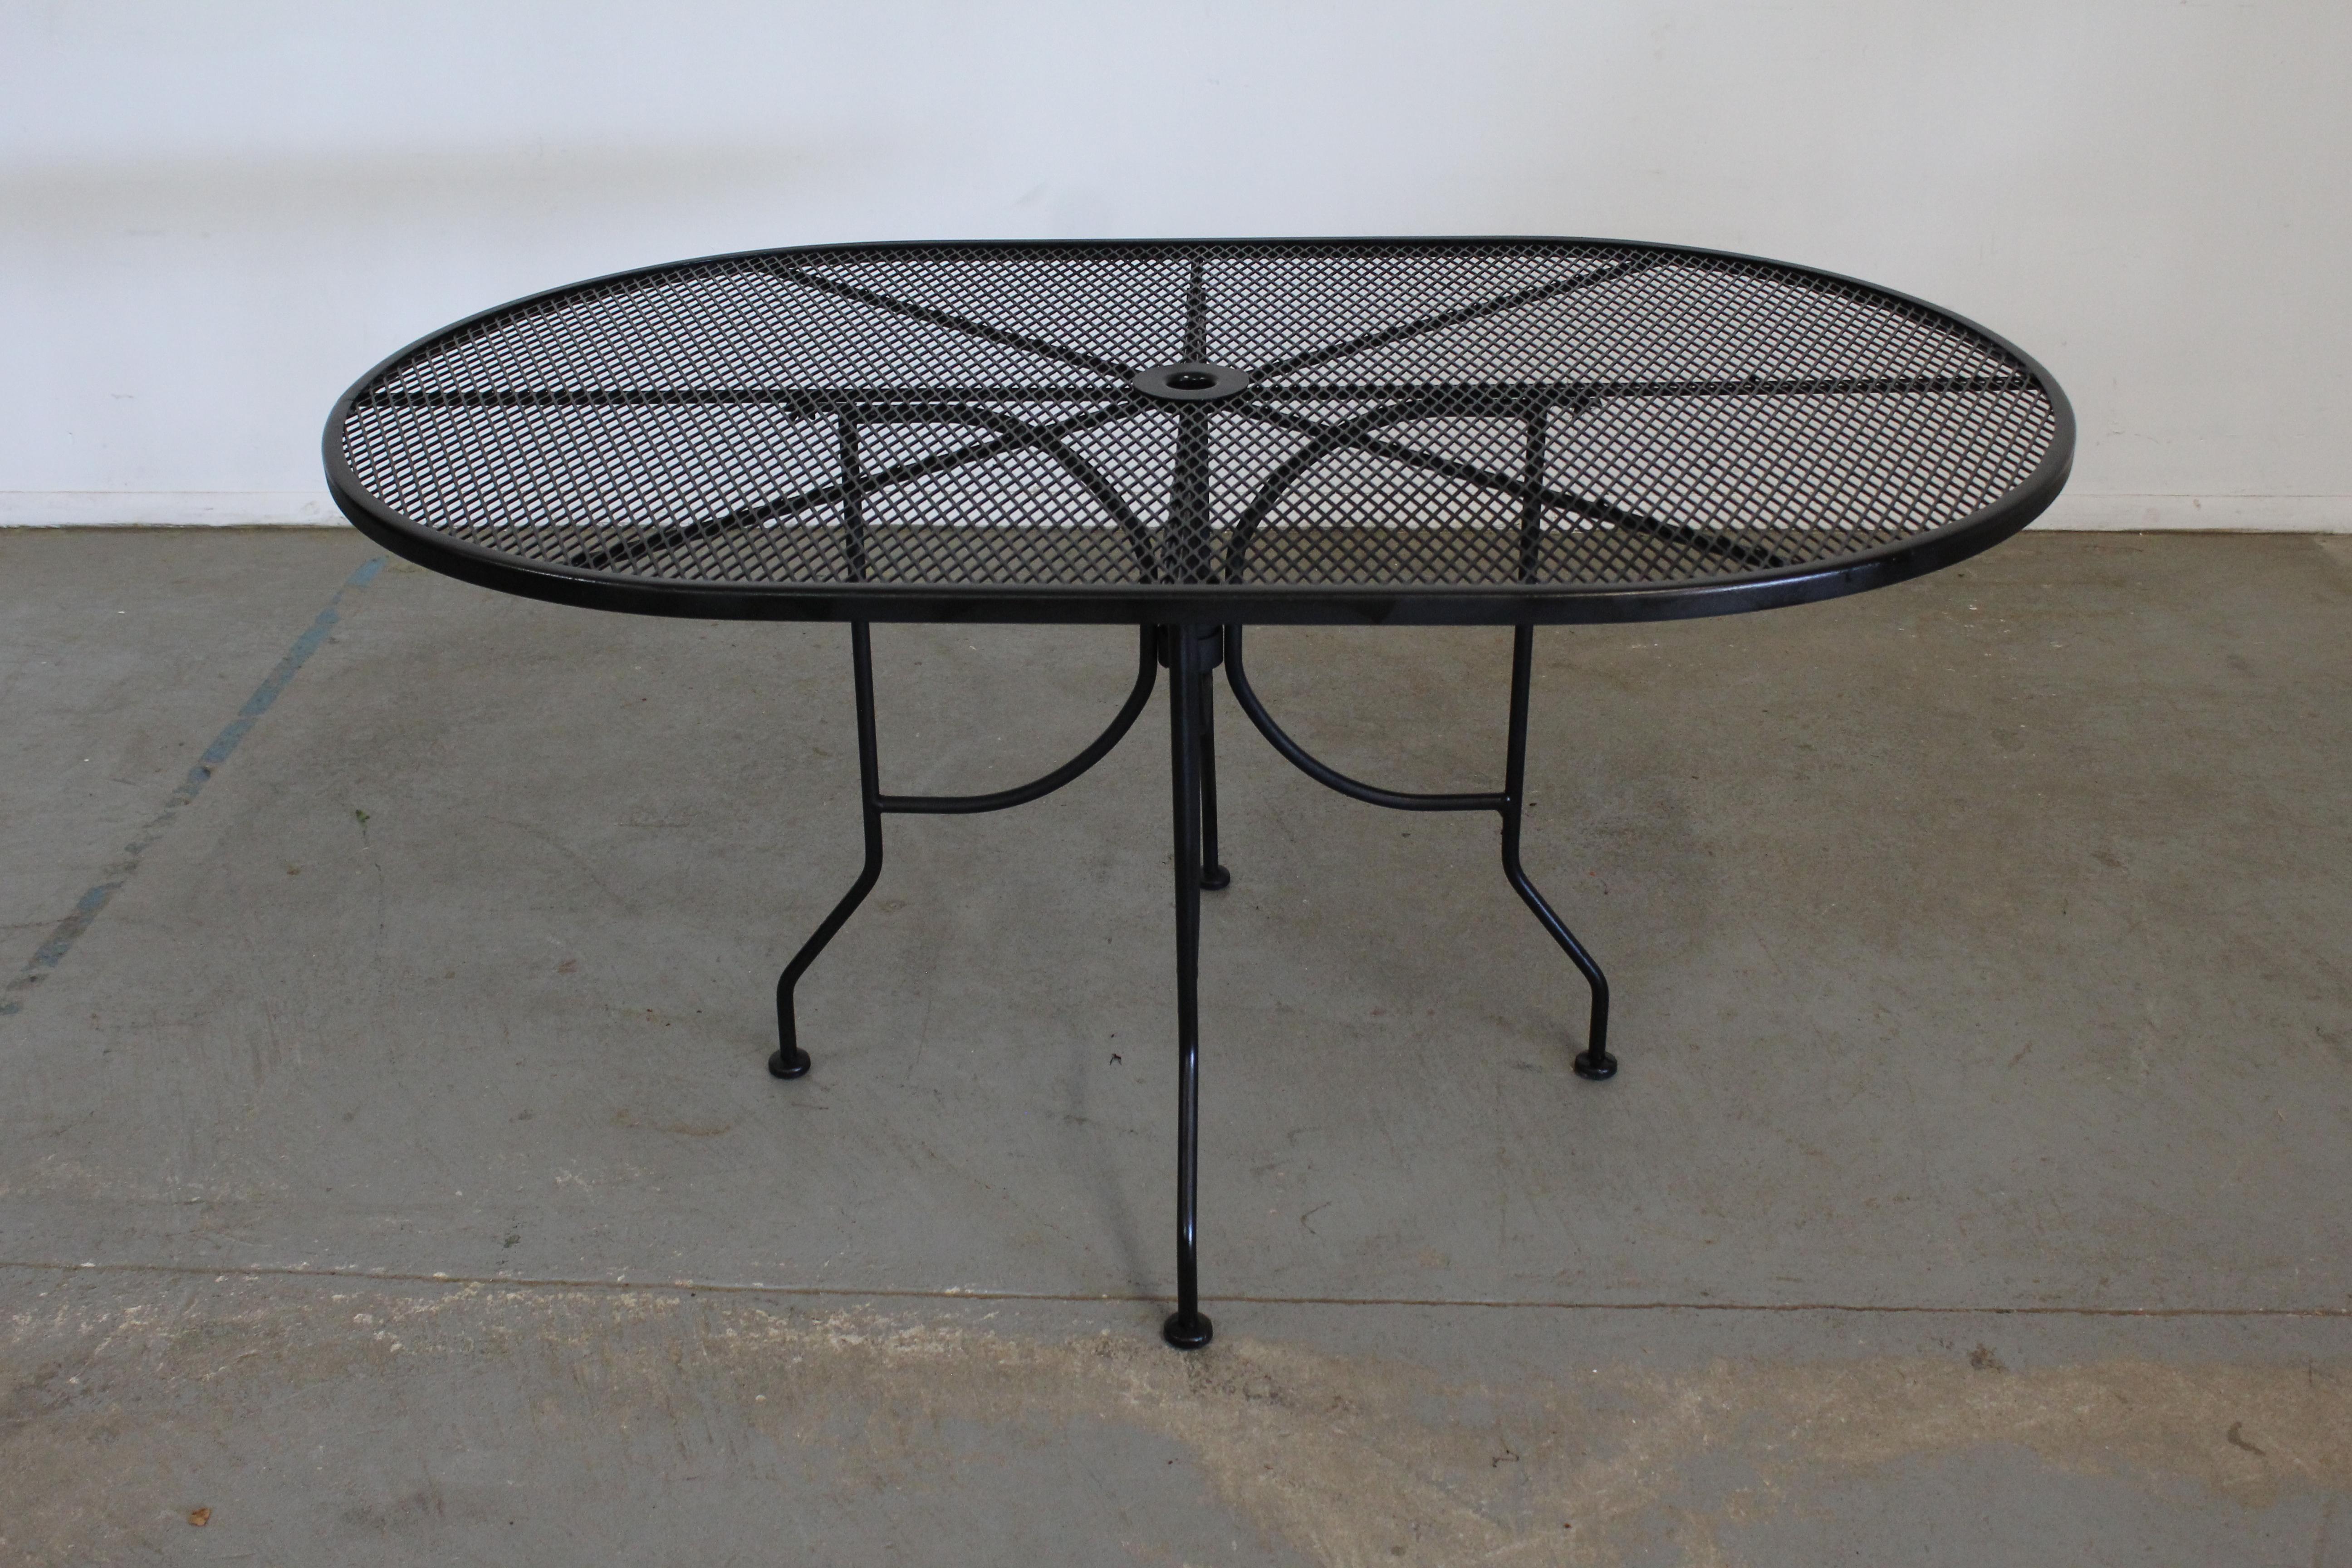 Mid-century outdoor iron woodard oval dining table.
Offered is a mid-century outdoor iron oval table. Features black paint and woven wrought iron. The table is structurally sound in good condition and can accommodate up to 6 seats. Has been